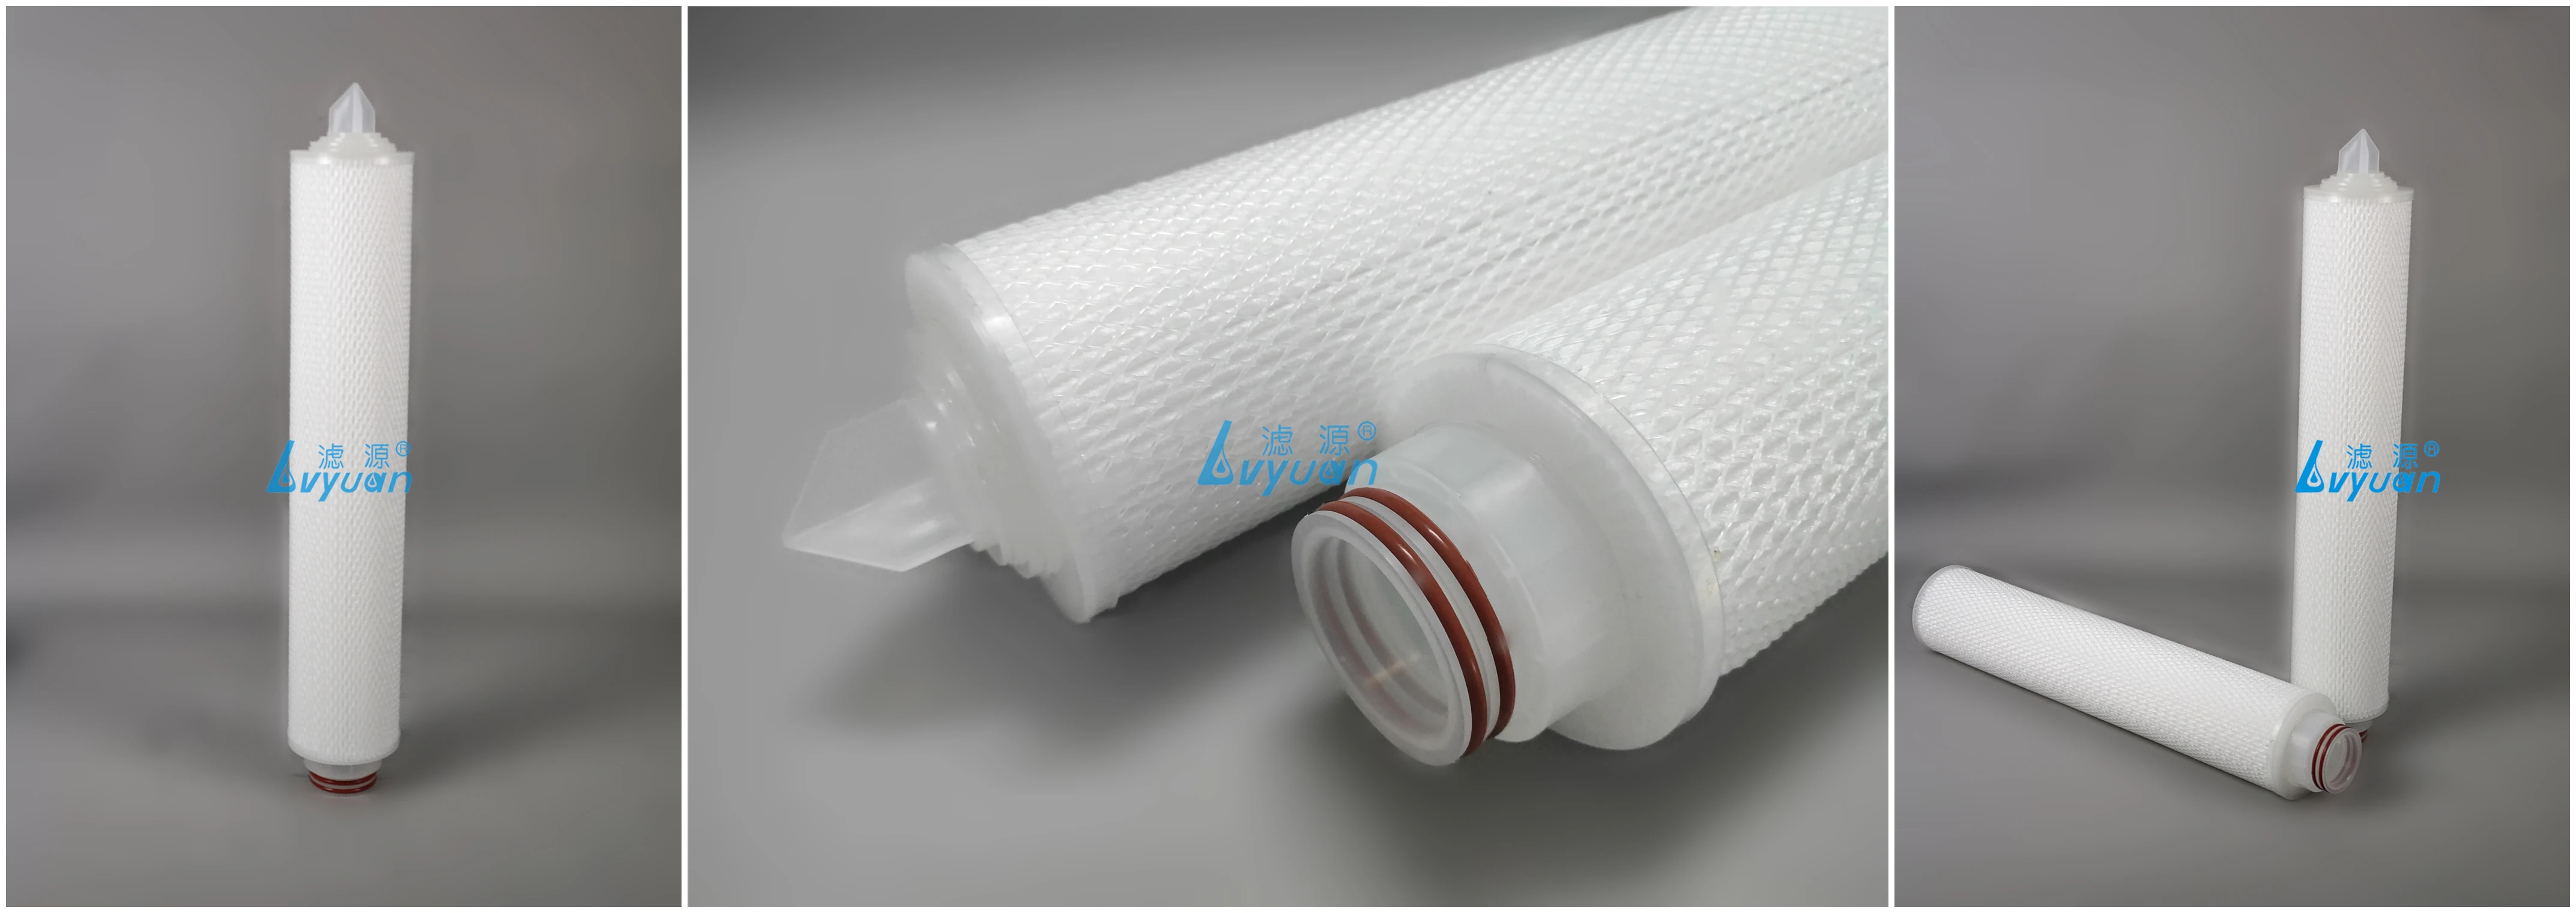 Lvyuan Safe pp pleated filter cartridge replace for water-2